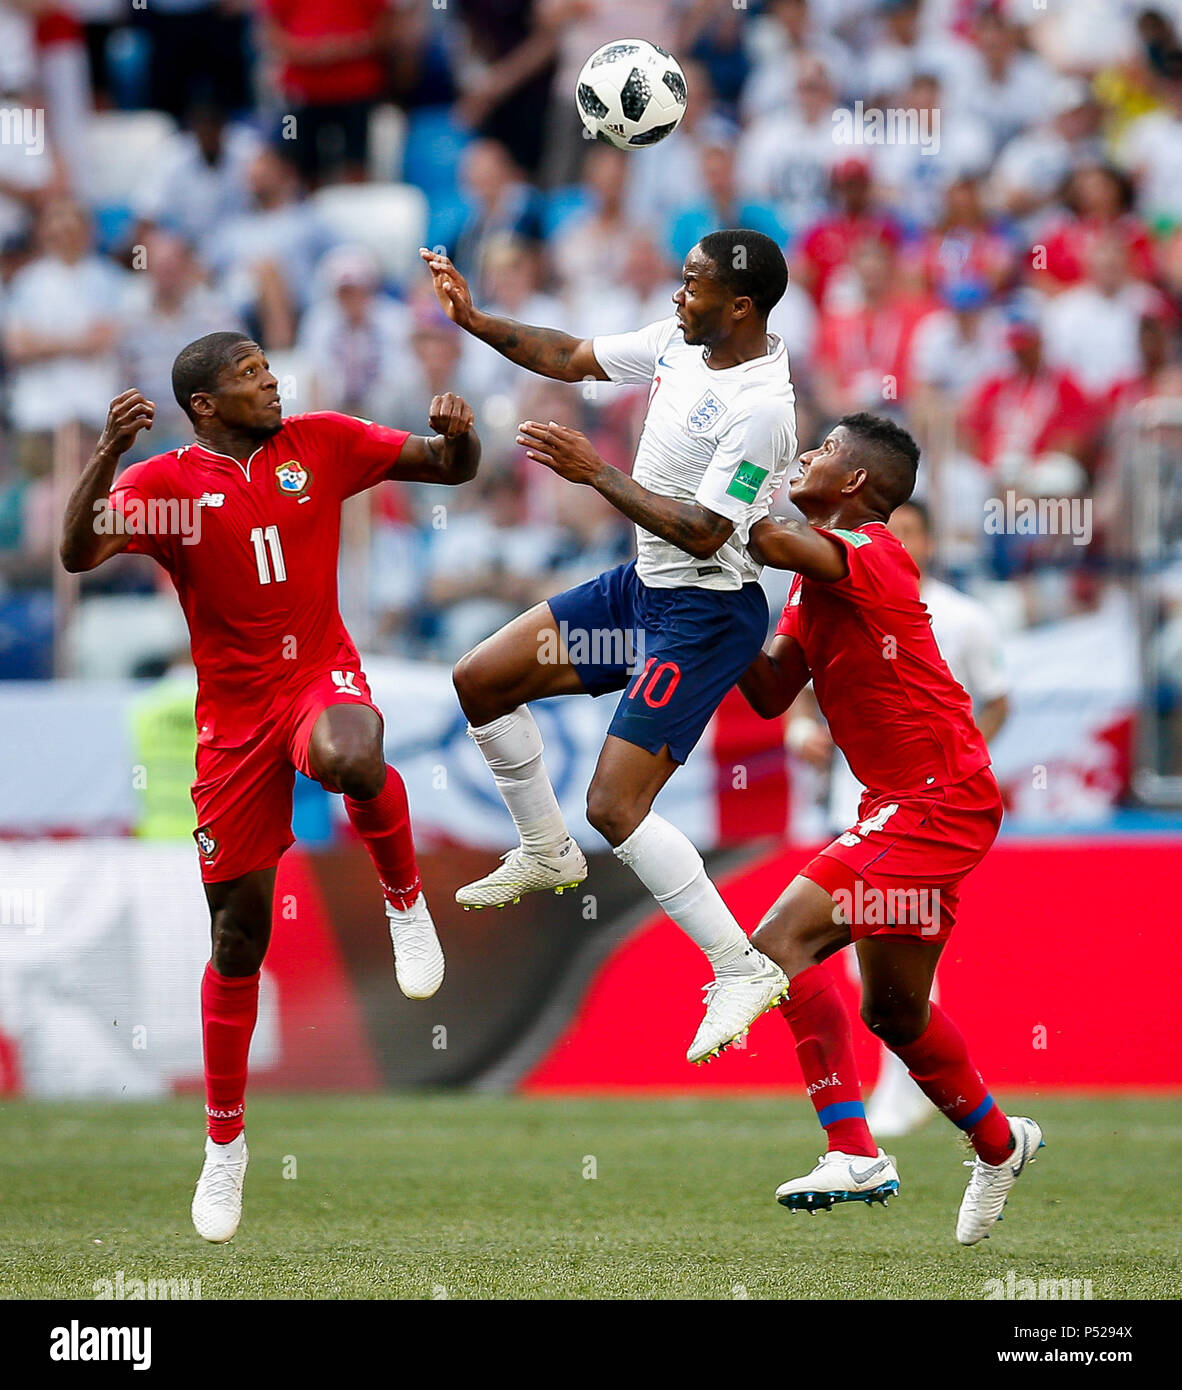 Nijni Novgorod, Russia. 24th June, 2018:ENGLAND VS. PANAMA - Raheem Sterling of England Armando Cooper and Fidel Escobar of Panama during a match between England and Panama valid for the second round of group G of the 2018 World Cup, held at the Nizhny Novgorod stadium in the city of Nihzny Novgorod, Russia. (Photo: Marcelo Machado de Melo/Fotoarena) Credit: Foto Arena LTDA/Alamy Live News Stock Photo